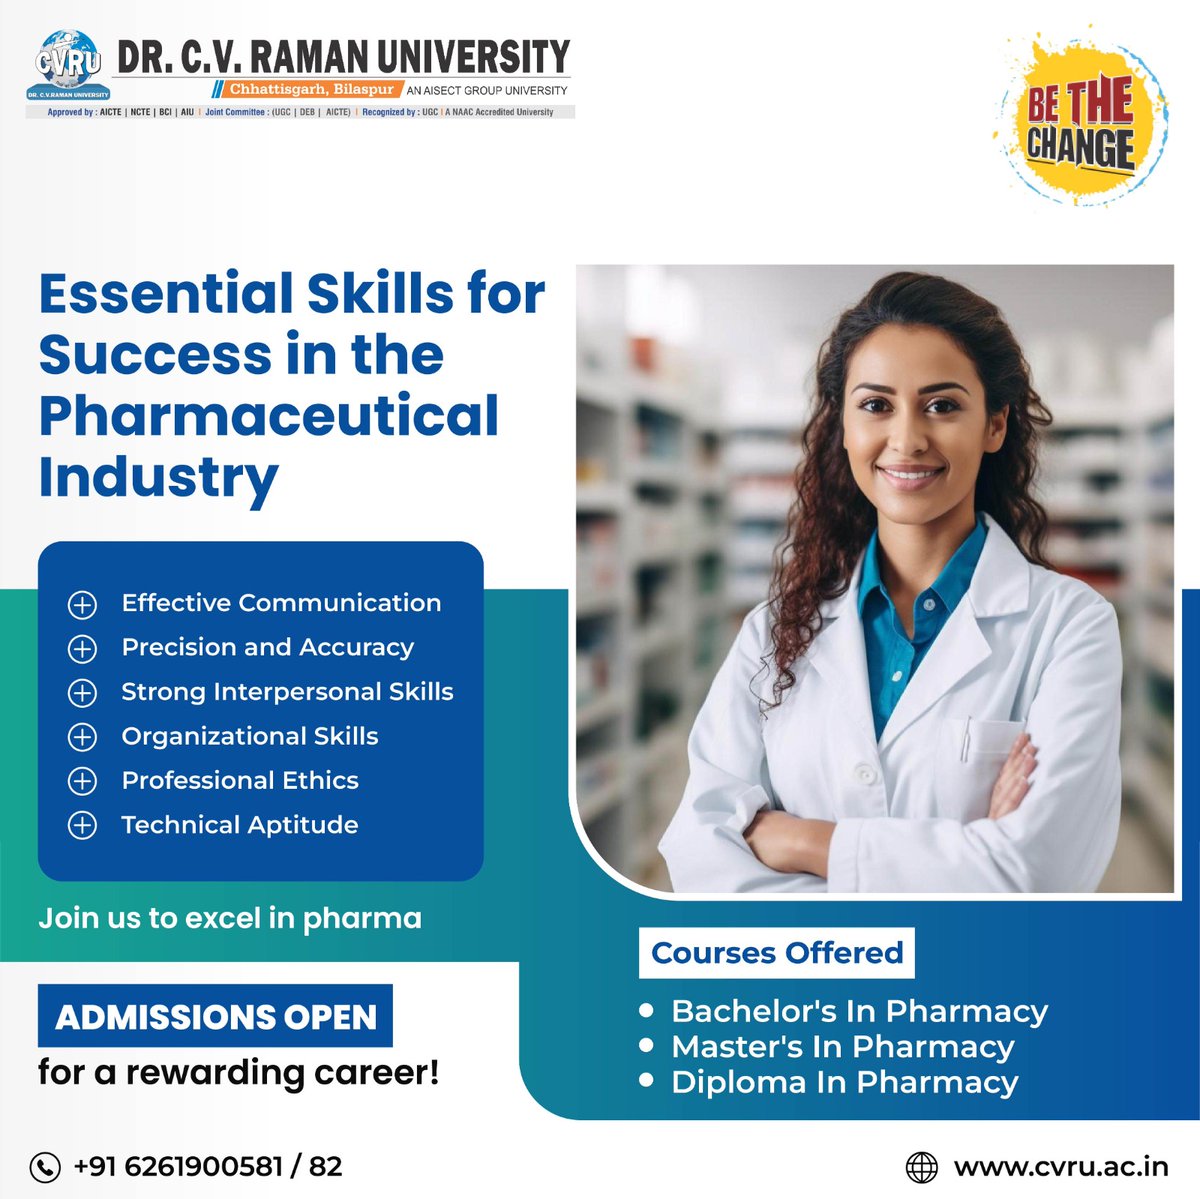 Join us for a rewarding career in the pharmaceutical industry, where essential skills like effective communication, precision, and strong interpersonal abilities are key. Develop organizational skills and professional ethics while honing your technical aptitude.